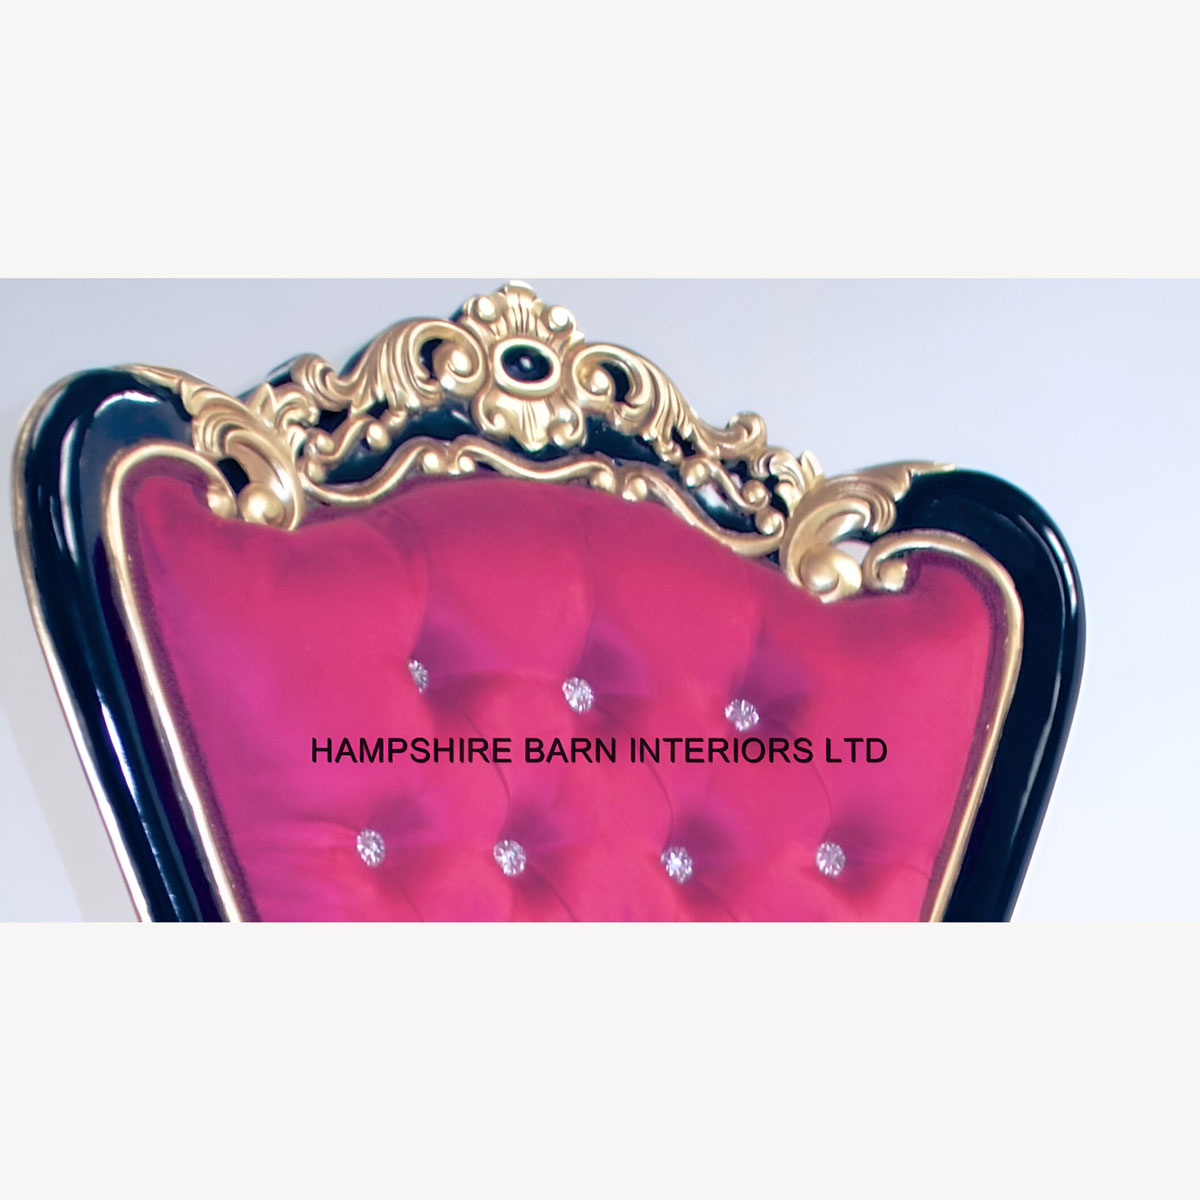 Fuchsia Pink Chair Mayfair Dining Throne Black And Gold Baroque With Crystal Buttons 2 - Hampshire Barn Interiors - Fuchsia Pink Chair Mayfair Dining Throne Black And Gold Baroque With Crystal Buttons -